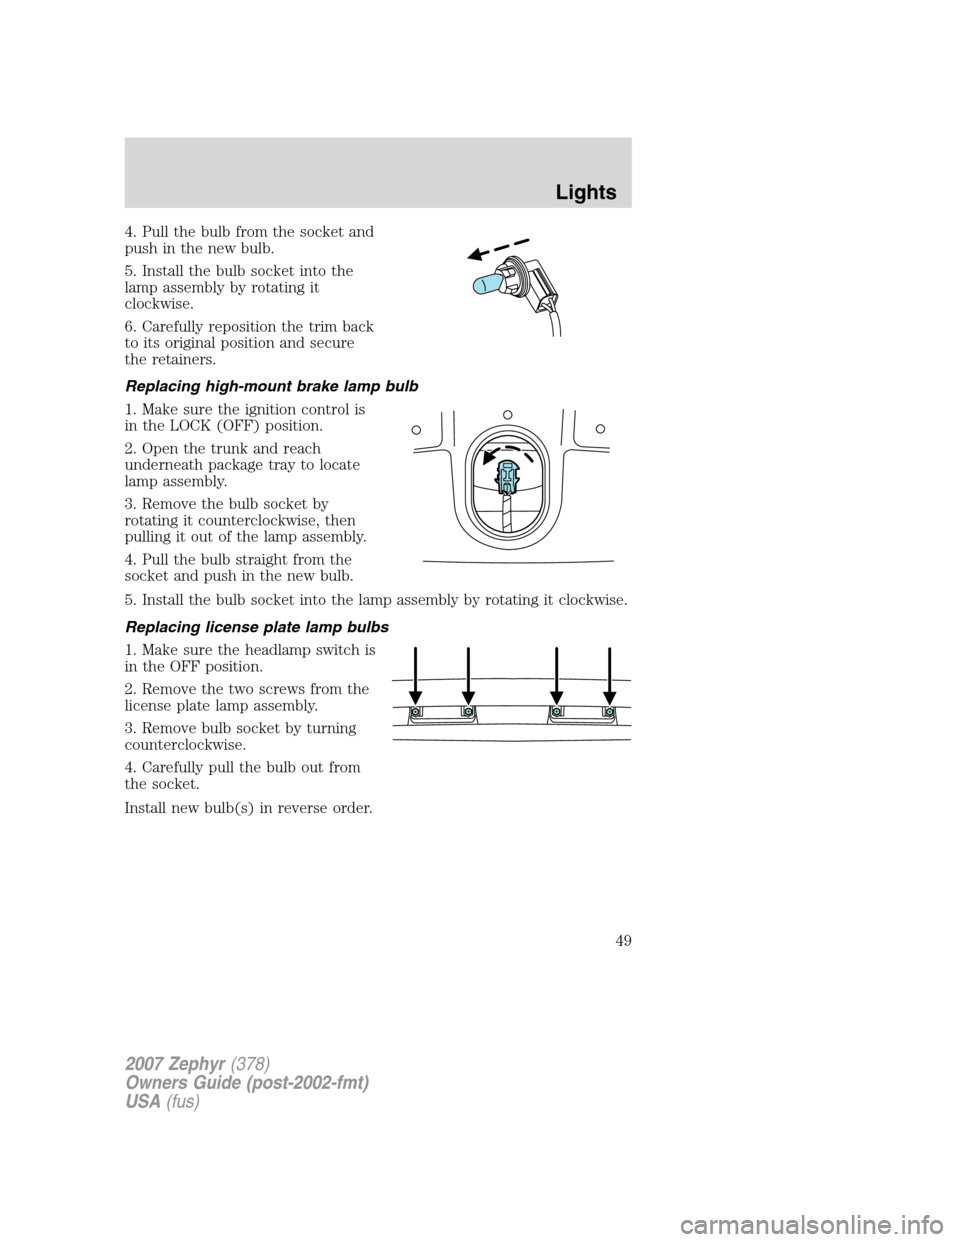 LINCOLN MKZ 2007  Owners Manual 4. Pull the bulb from the socket and
push in the new bulb.
5. Install the bulb socket into the
lamp assembly by rotating it
clockwise.
6. Carefully reposition the trim back
to its original position an